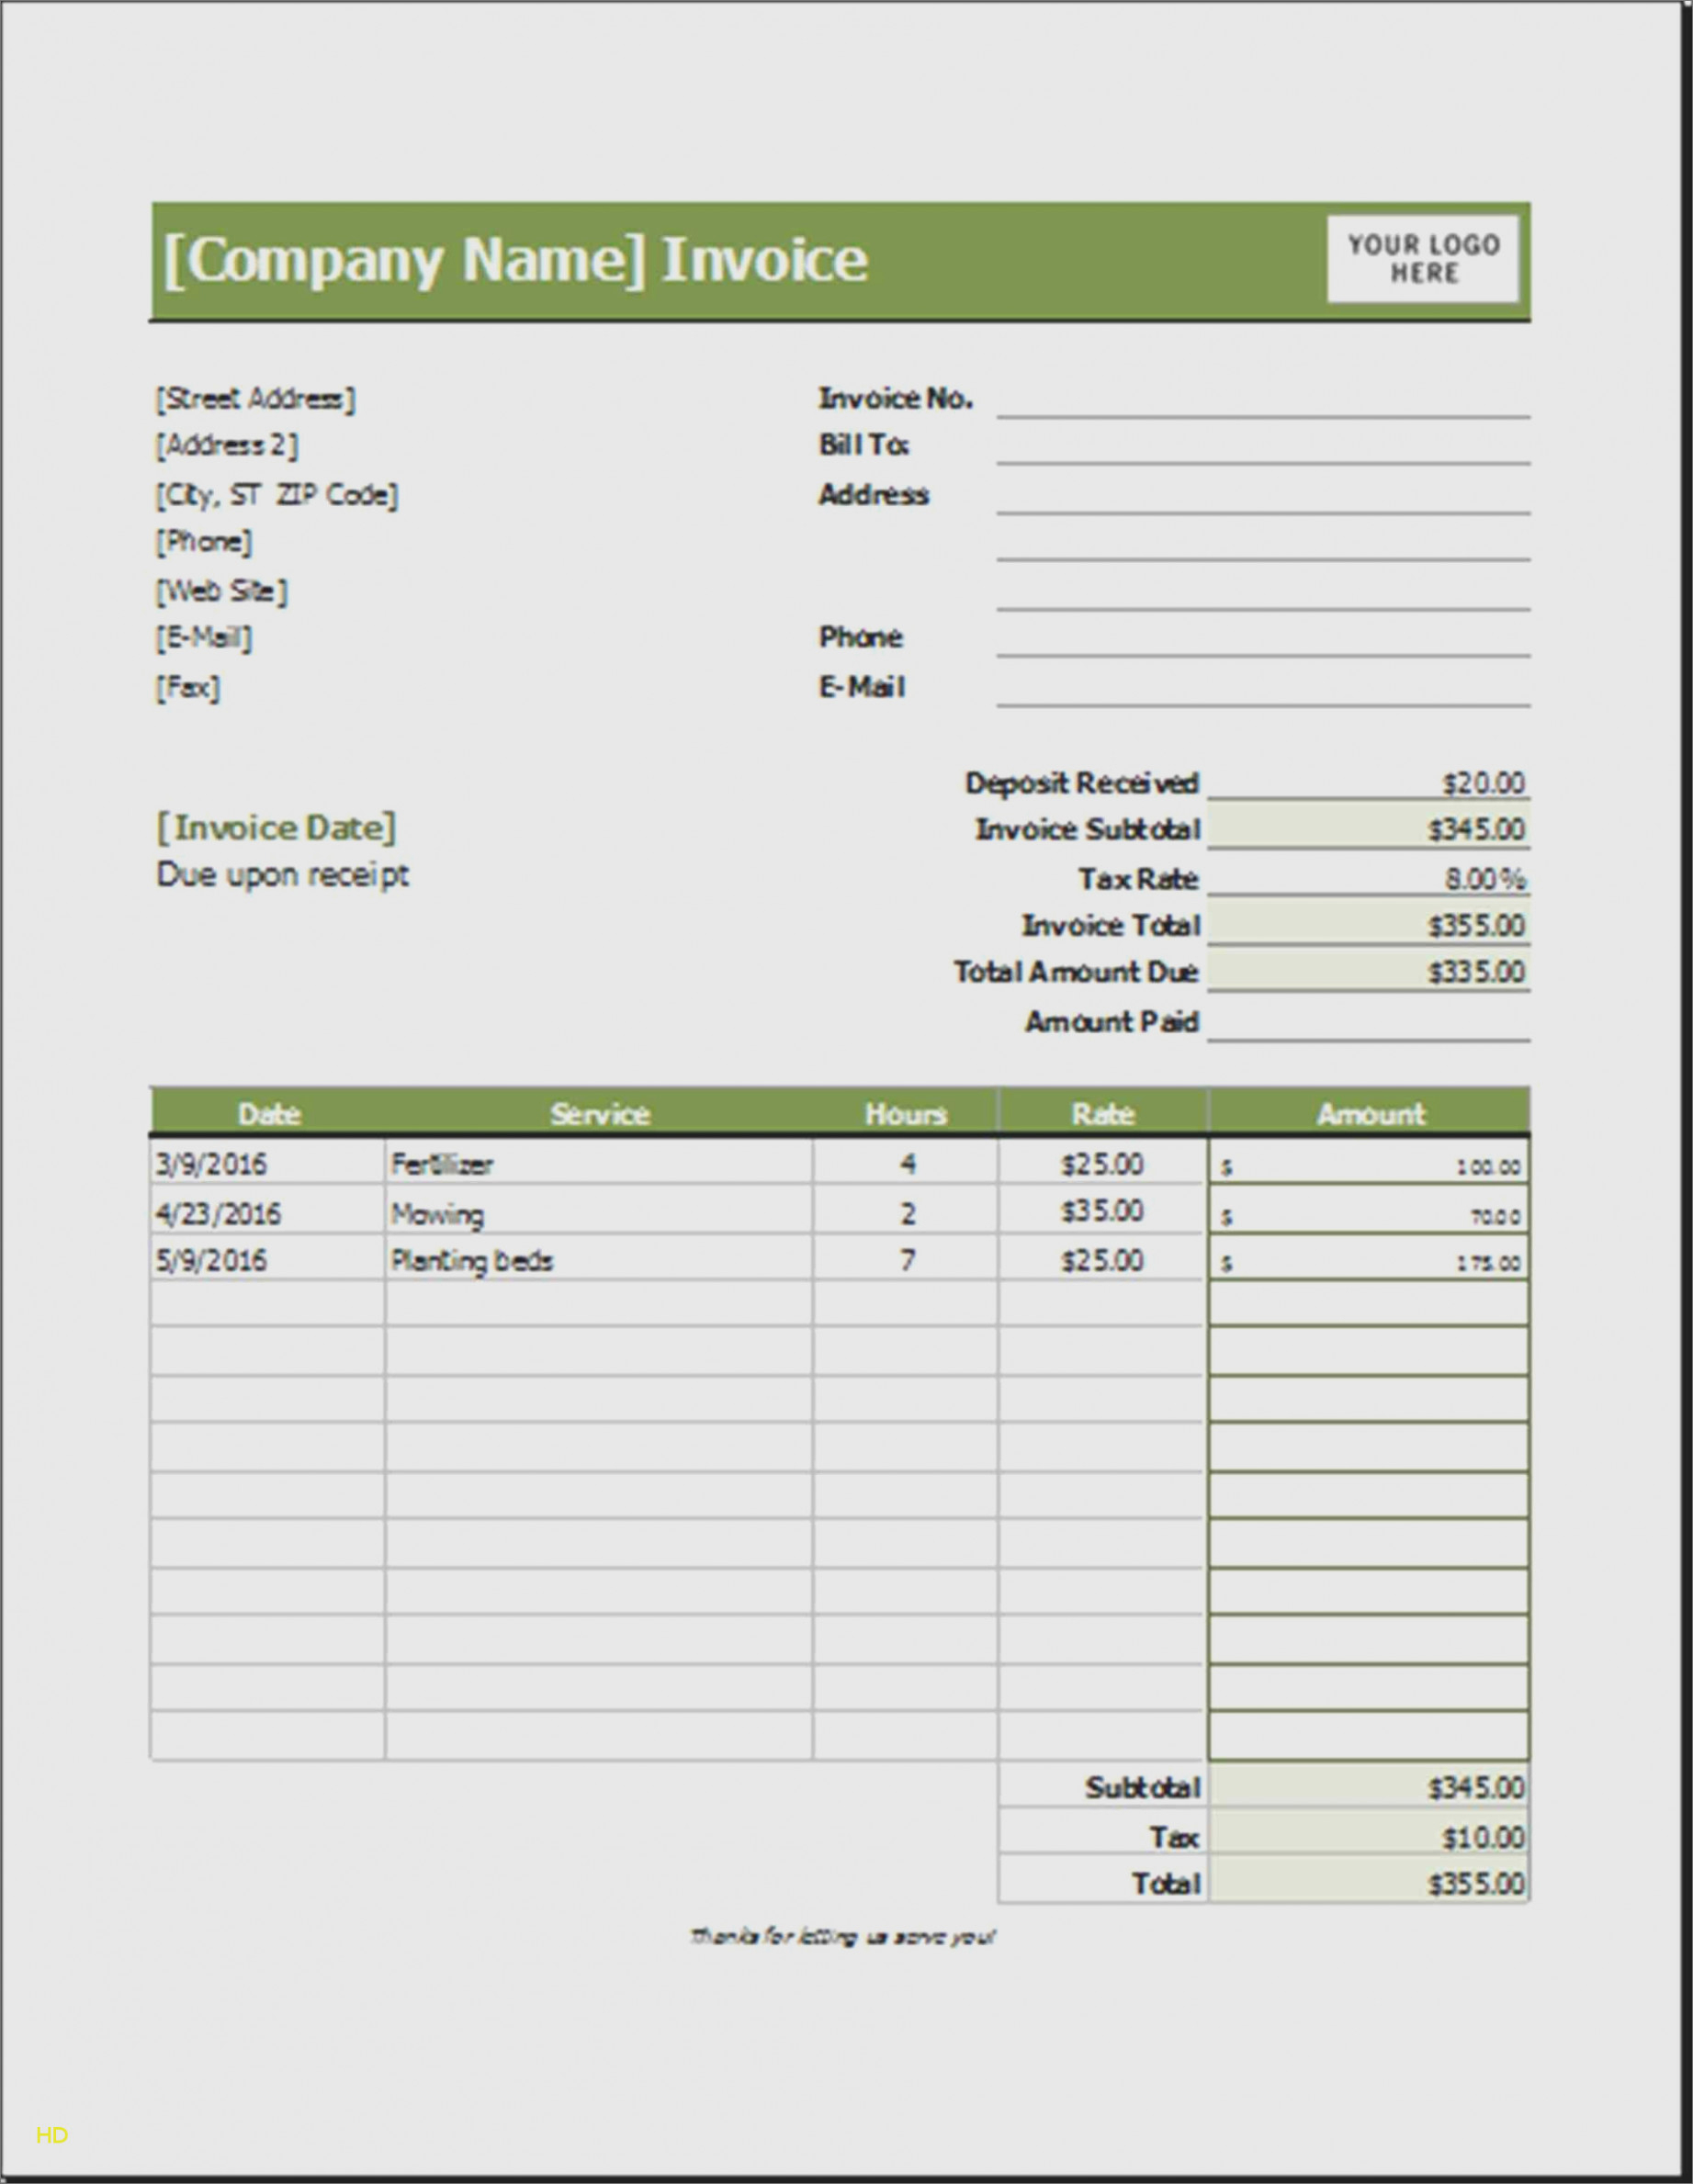 15 Fresh Sample Lawn Care Invoice Free Invoice Template throughout